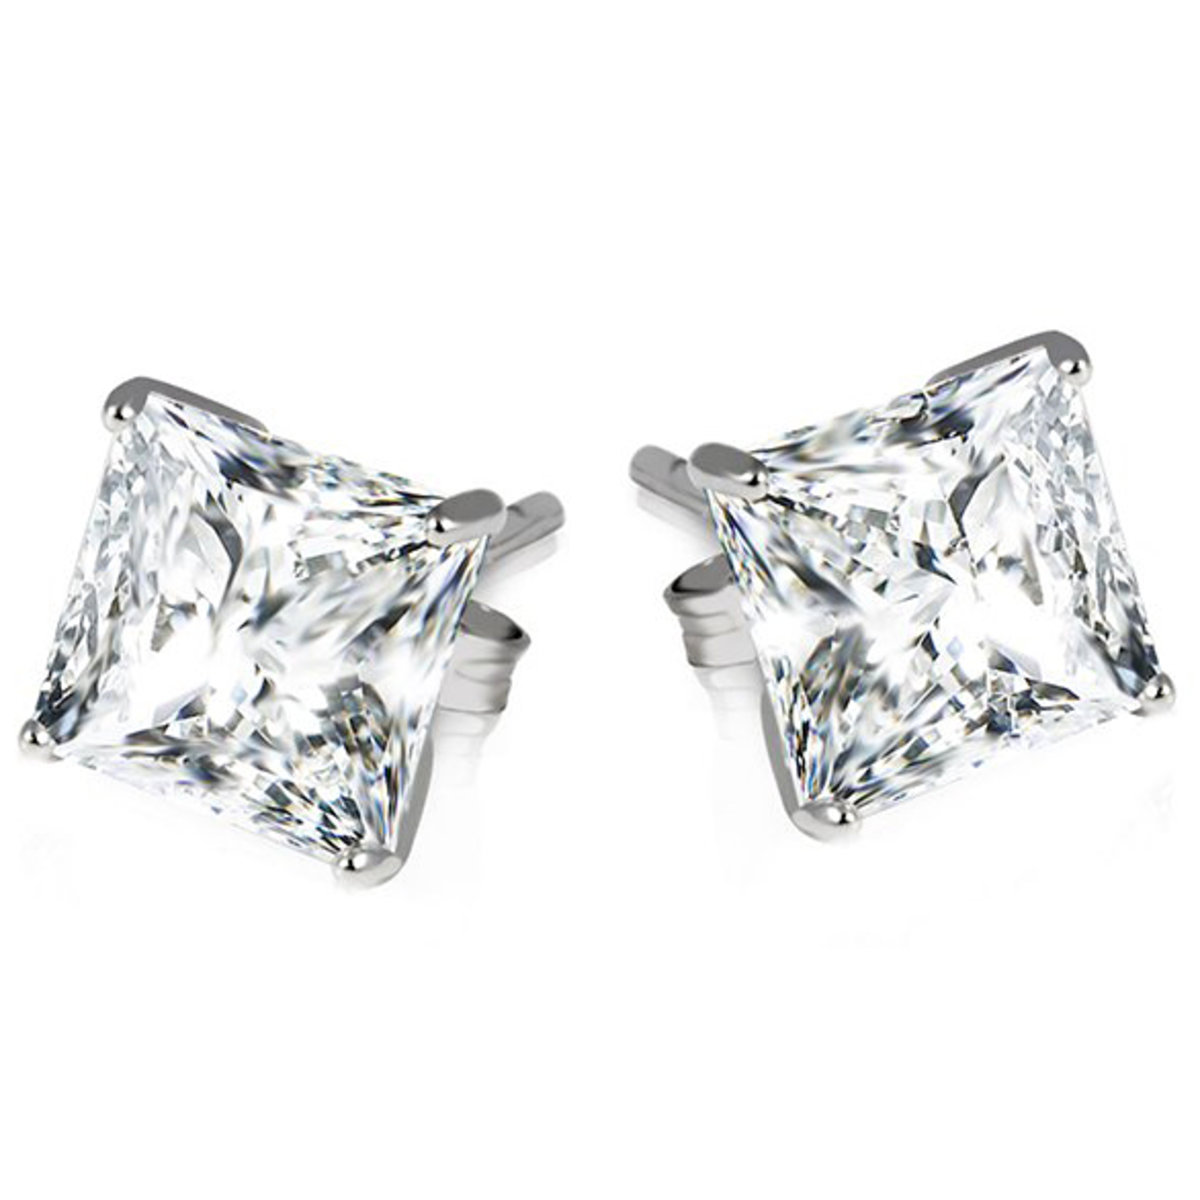 FREE 2ct or 8ct Sterling Silver Princess Cut Earrings – Just pay shipping!